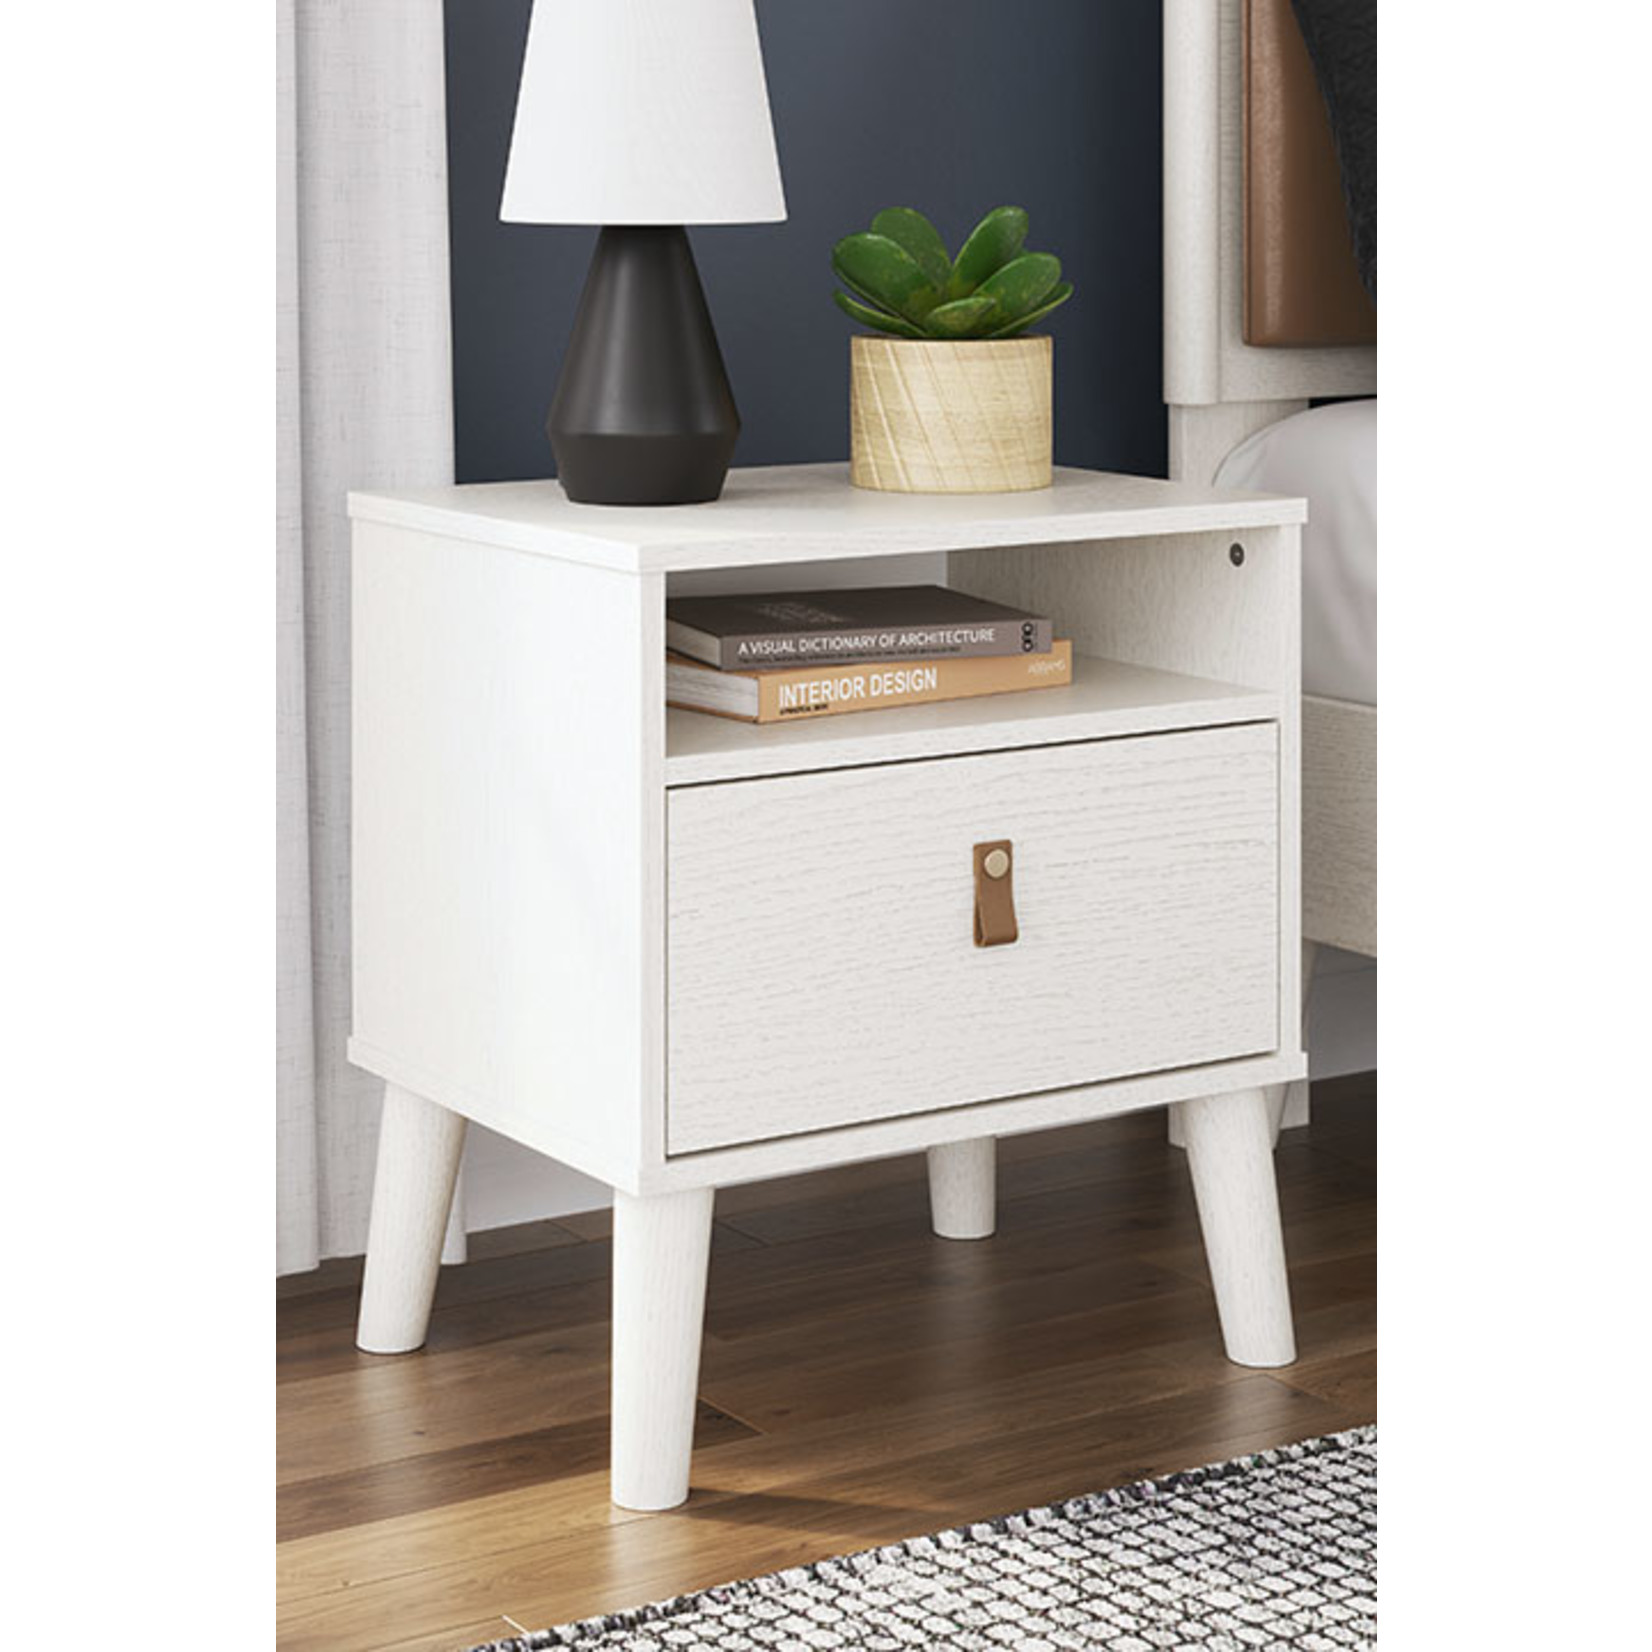 ASHLEY FURNITURE APRILYN WHITE NIGHT STAND BY ASHLEY